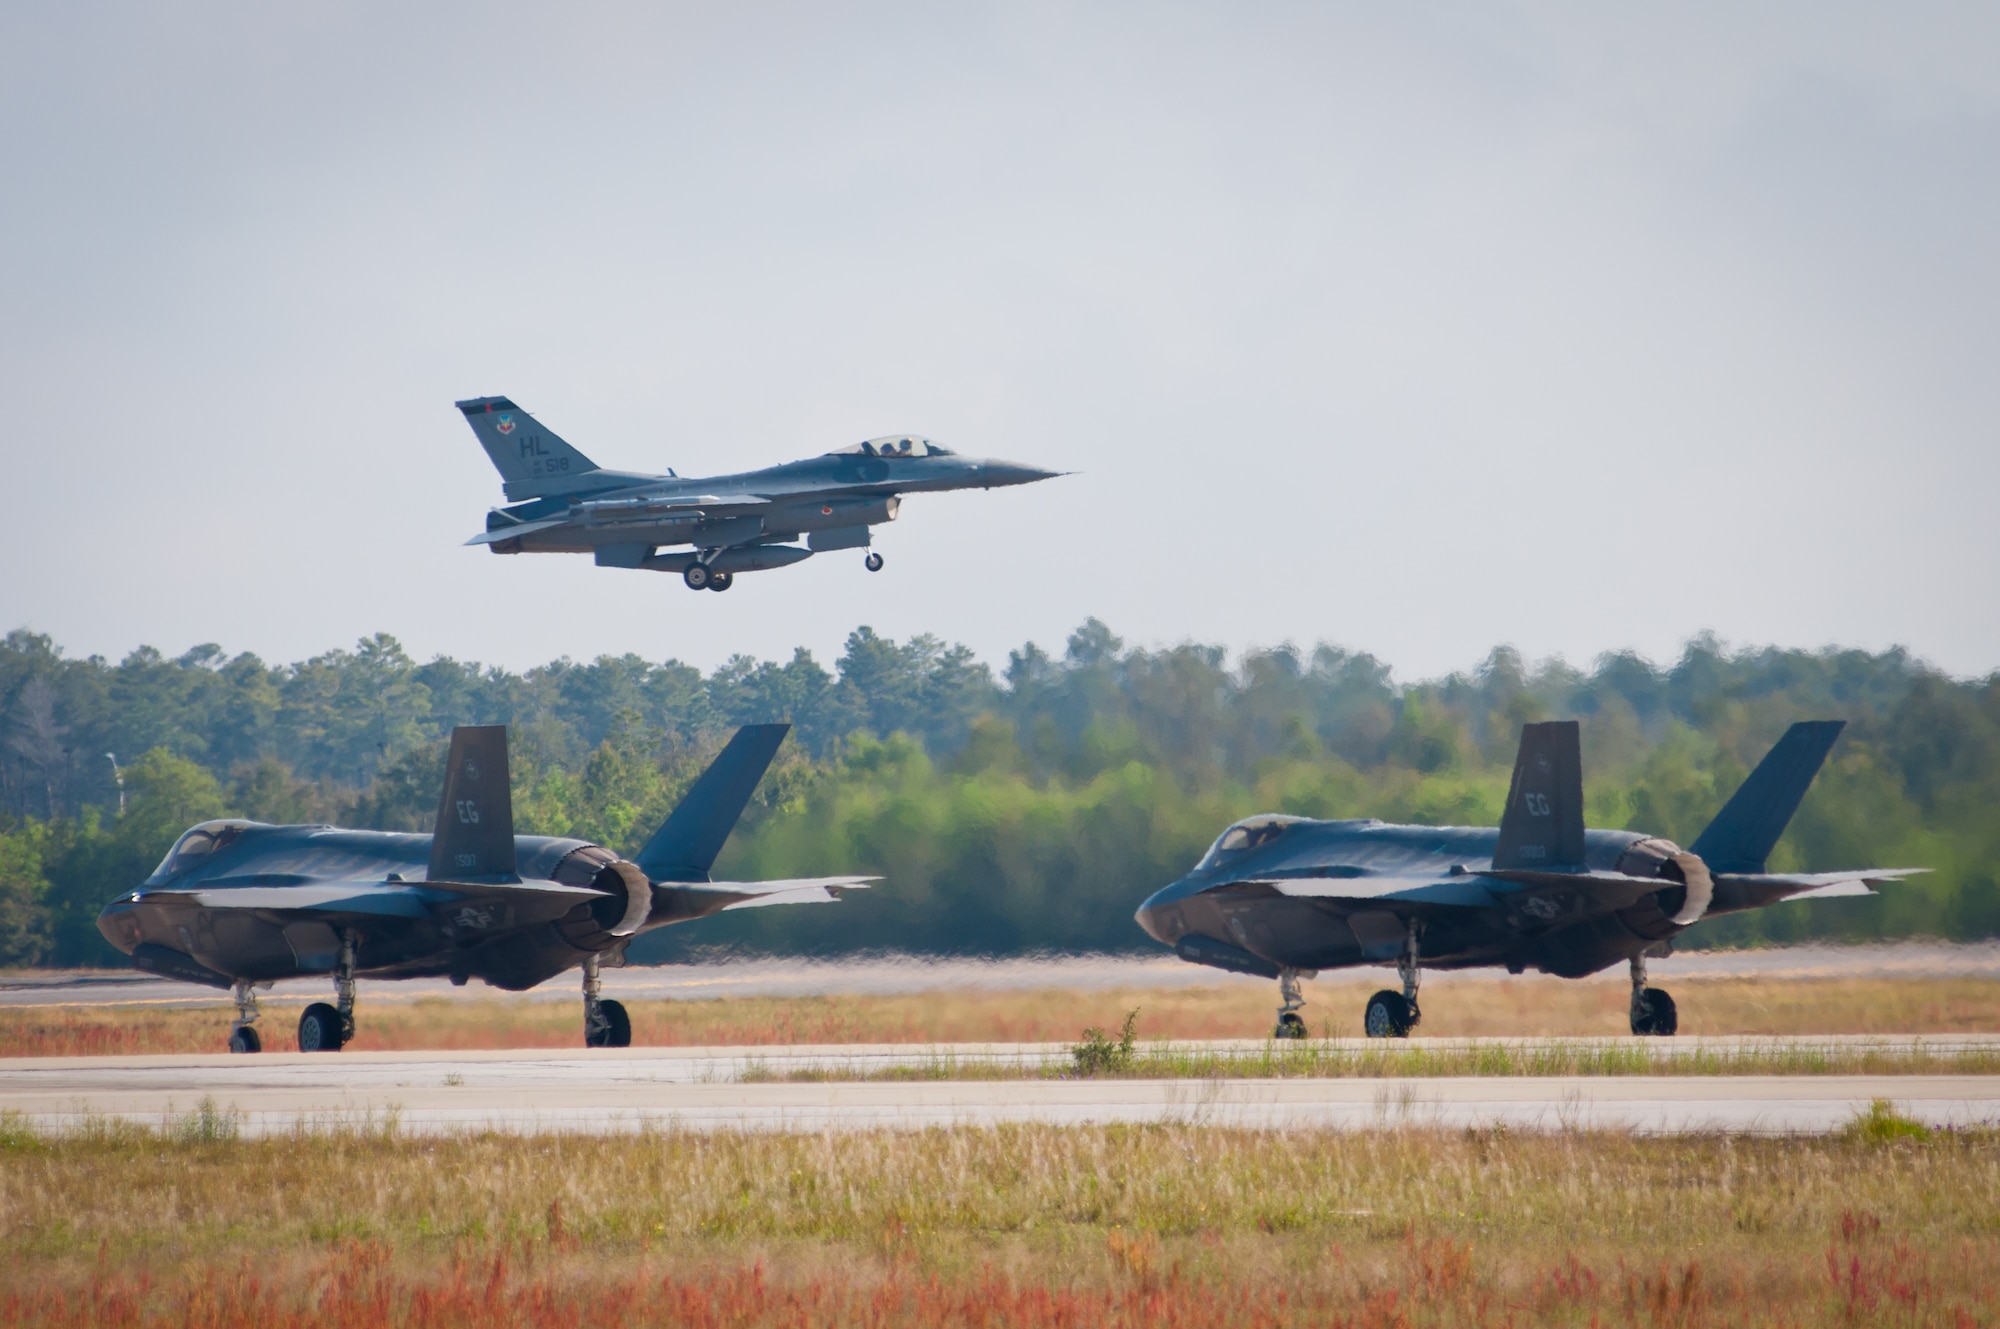 An F-16 Fighting Falcon takes off while two F-35 Lightning IIs taxi on the flightline in a training mission April 24, 2014, at Eglin Air Force Base, Fla. F-16s from the 419th and 388th Fighter Wings from Hill AFB, Utah, conducted their first training missions alongside the U.S. Air Force’s newest fighter aircraft. (U.S. Air Force photo/Staff Sgt. Christina Judd) 